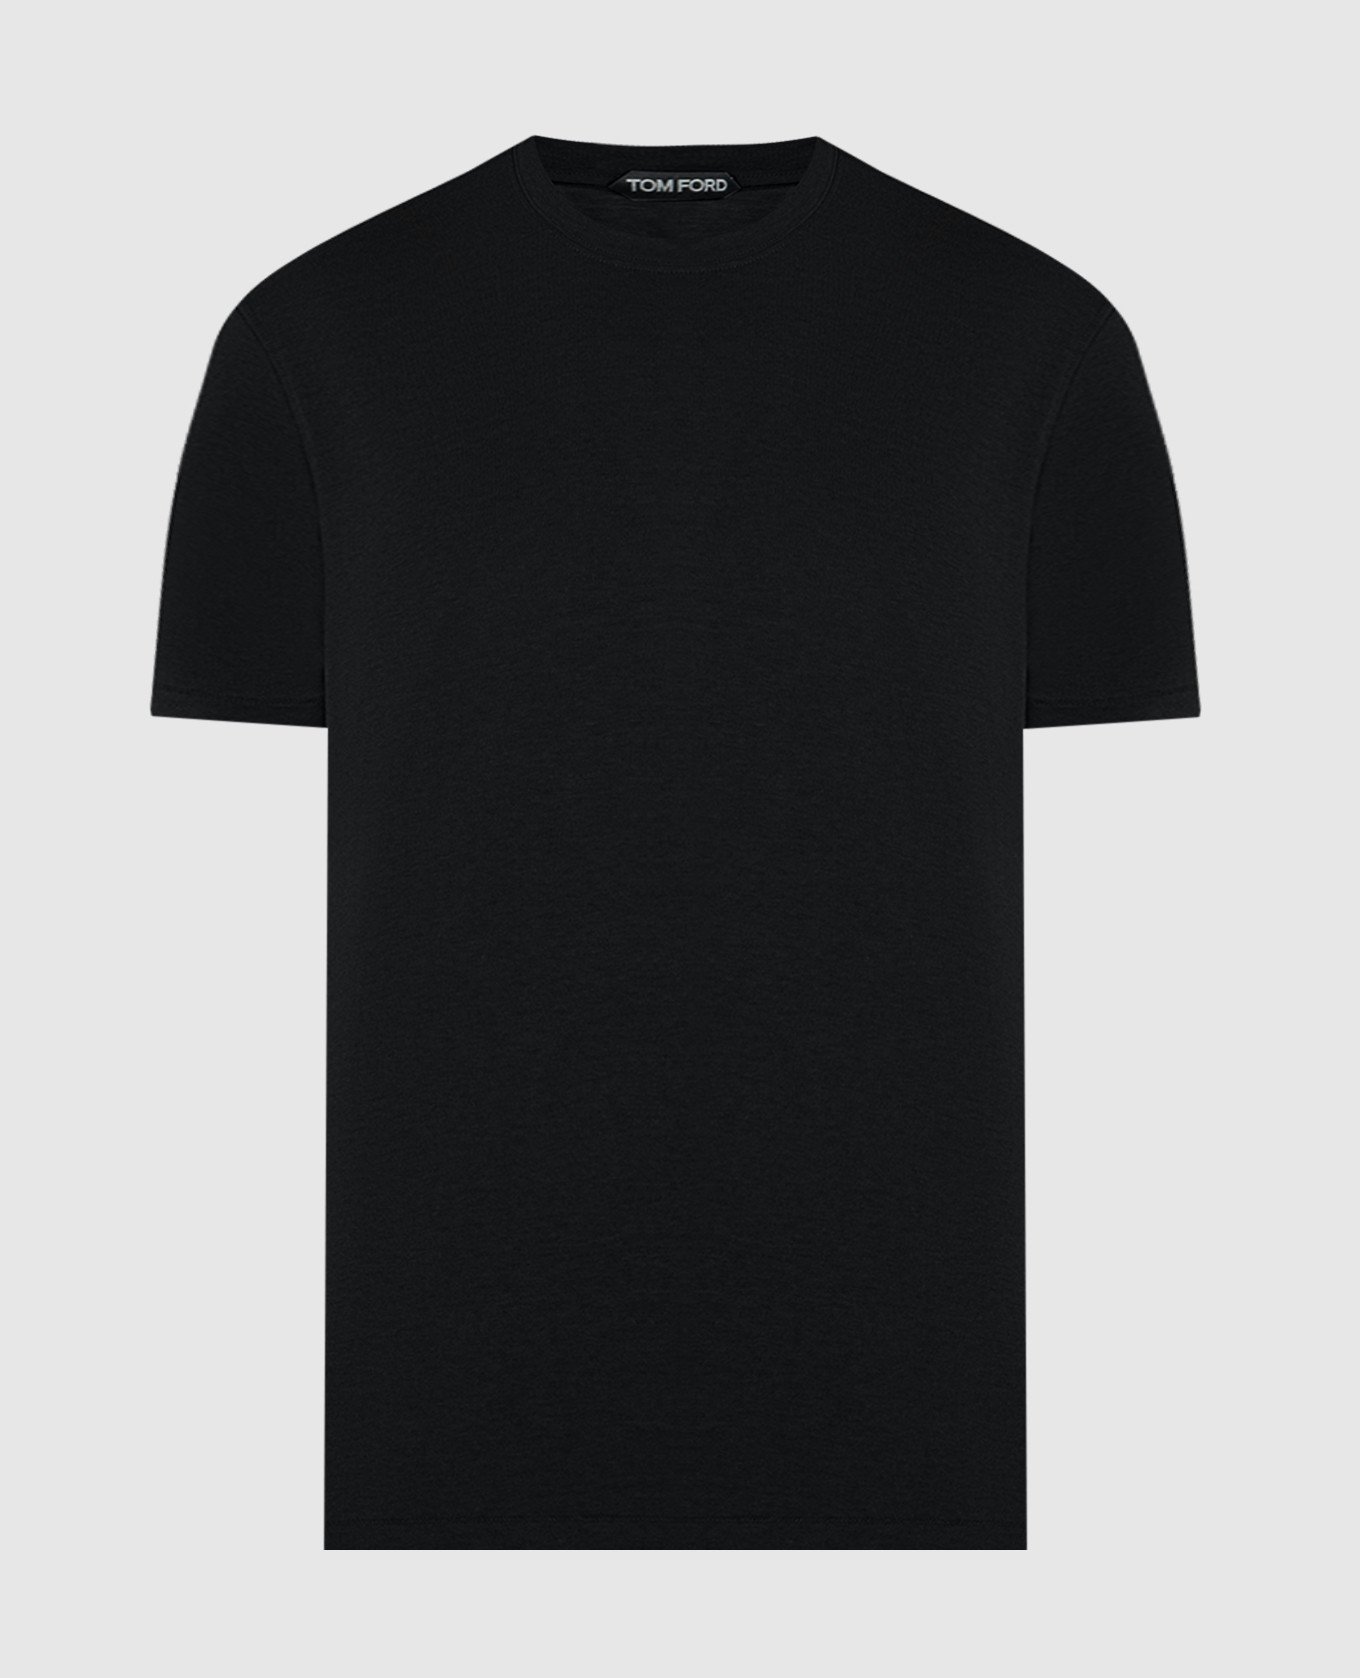 Black t-shirt with monogram logo embroidery